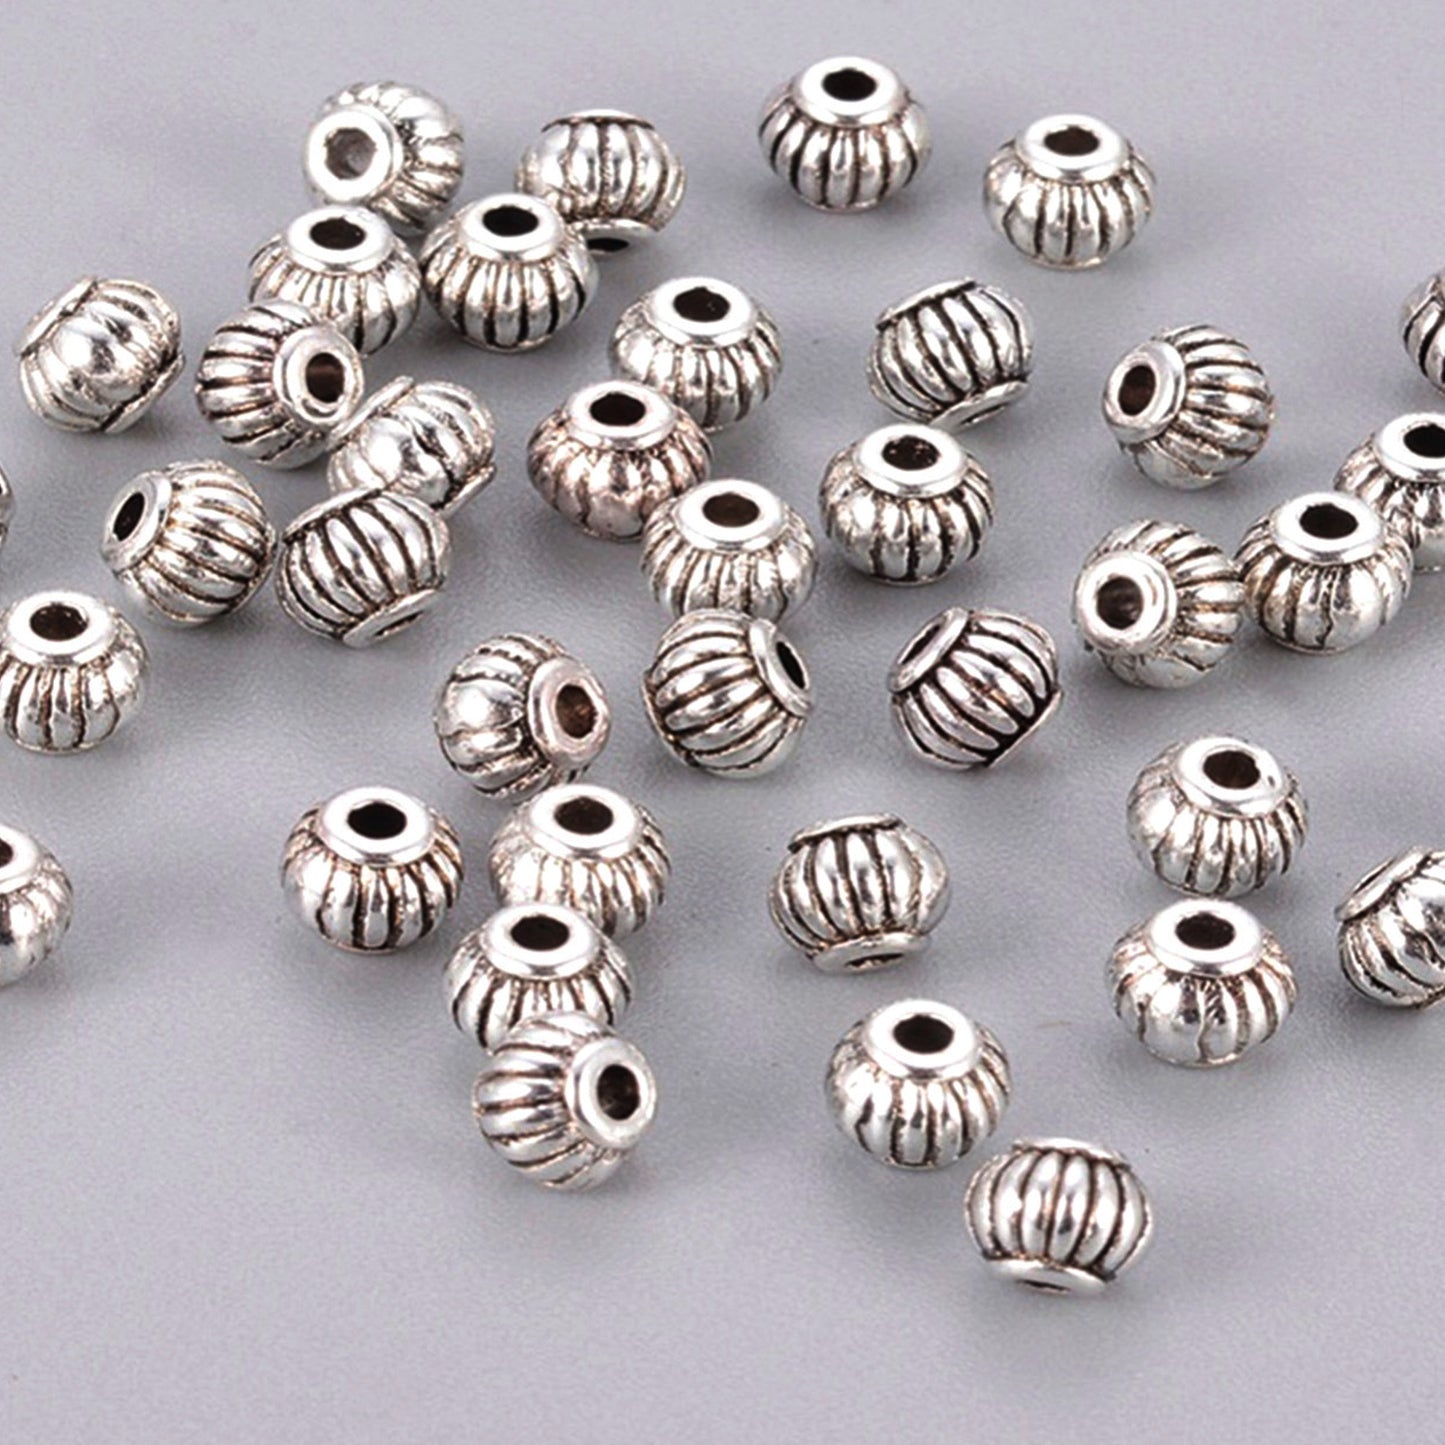 Tibetian Styled Spacer Beads